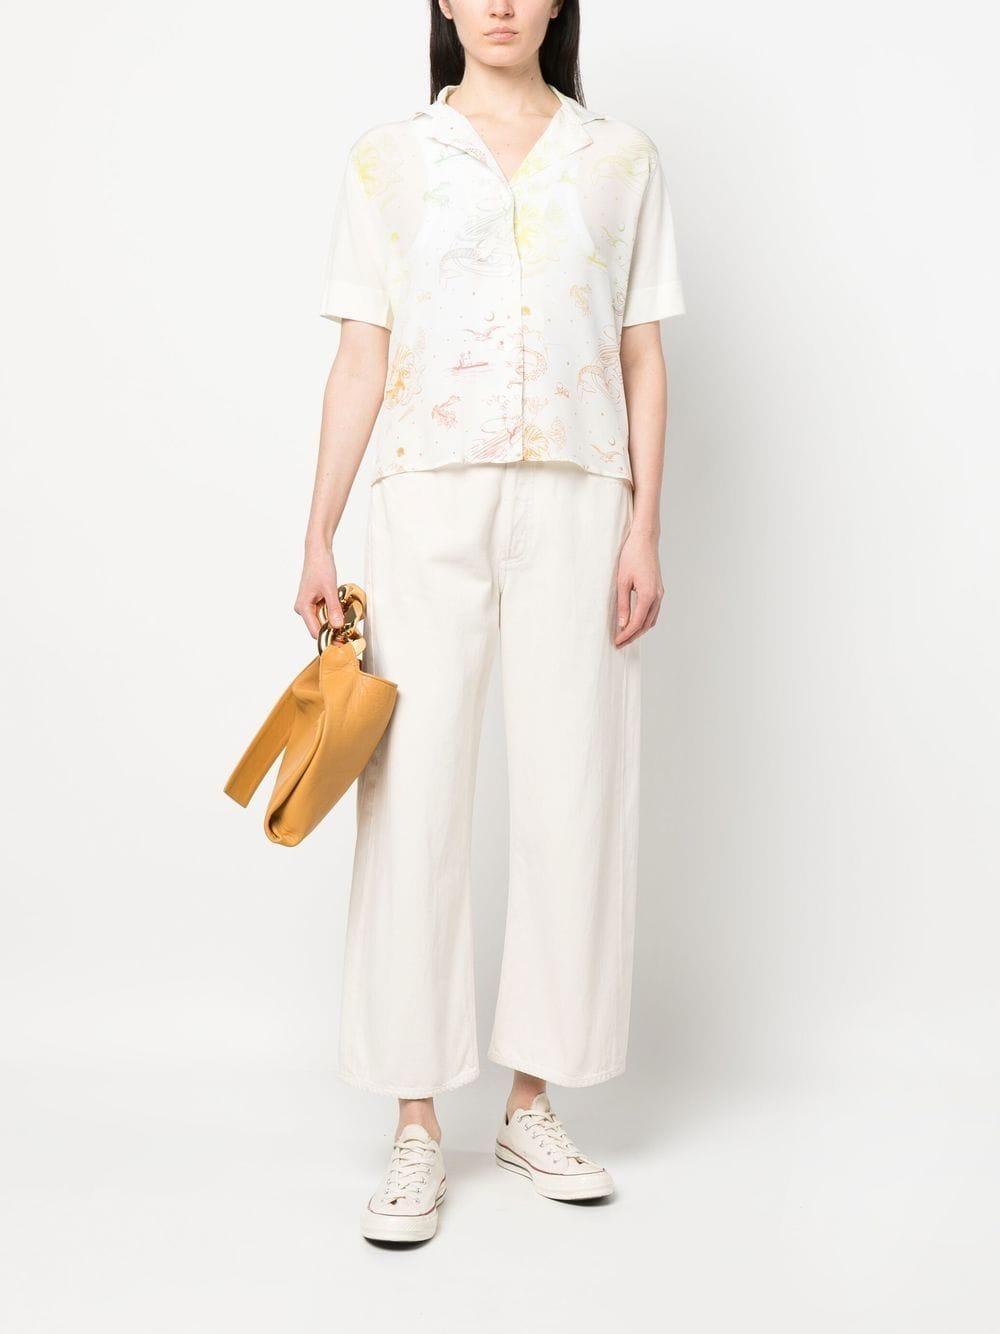 PS by Paul Smith Printed Cotton Shirt in Natural | Lyst